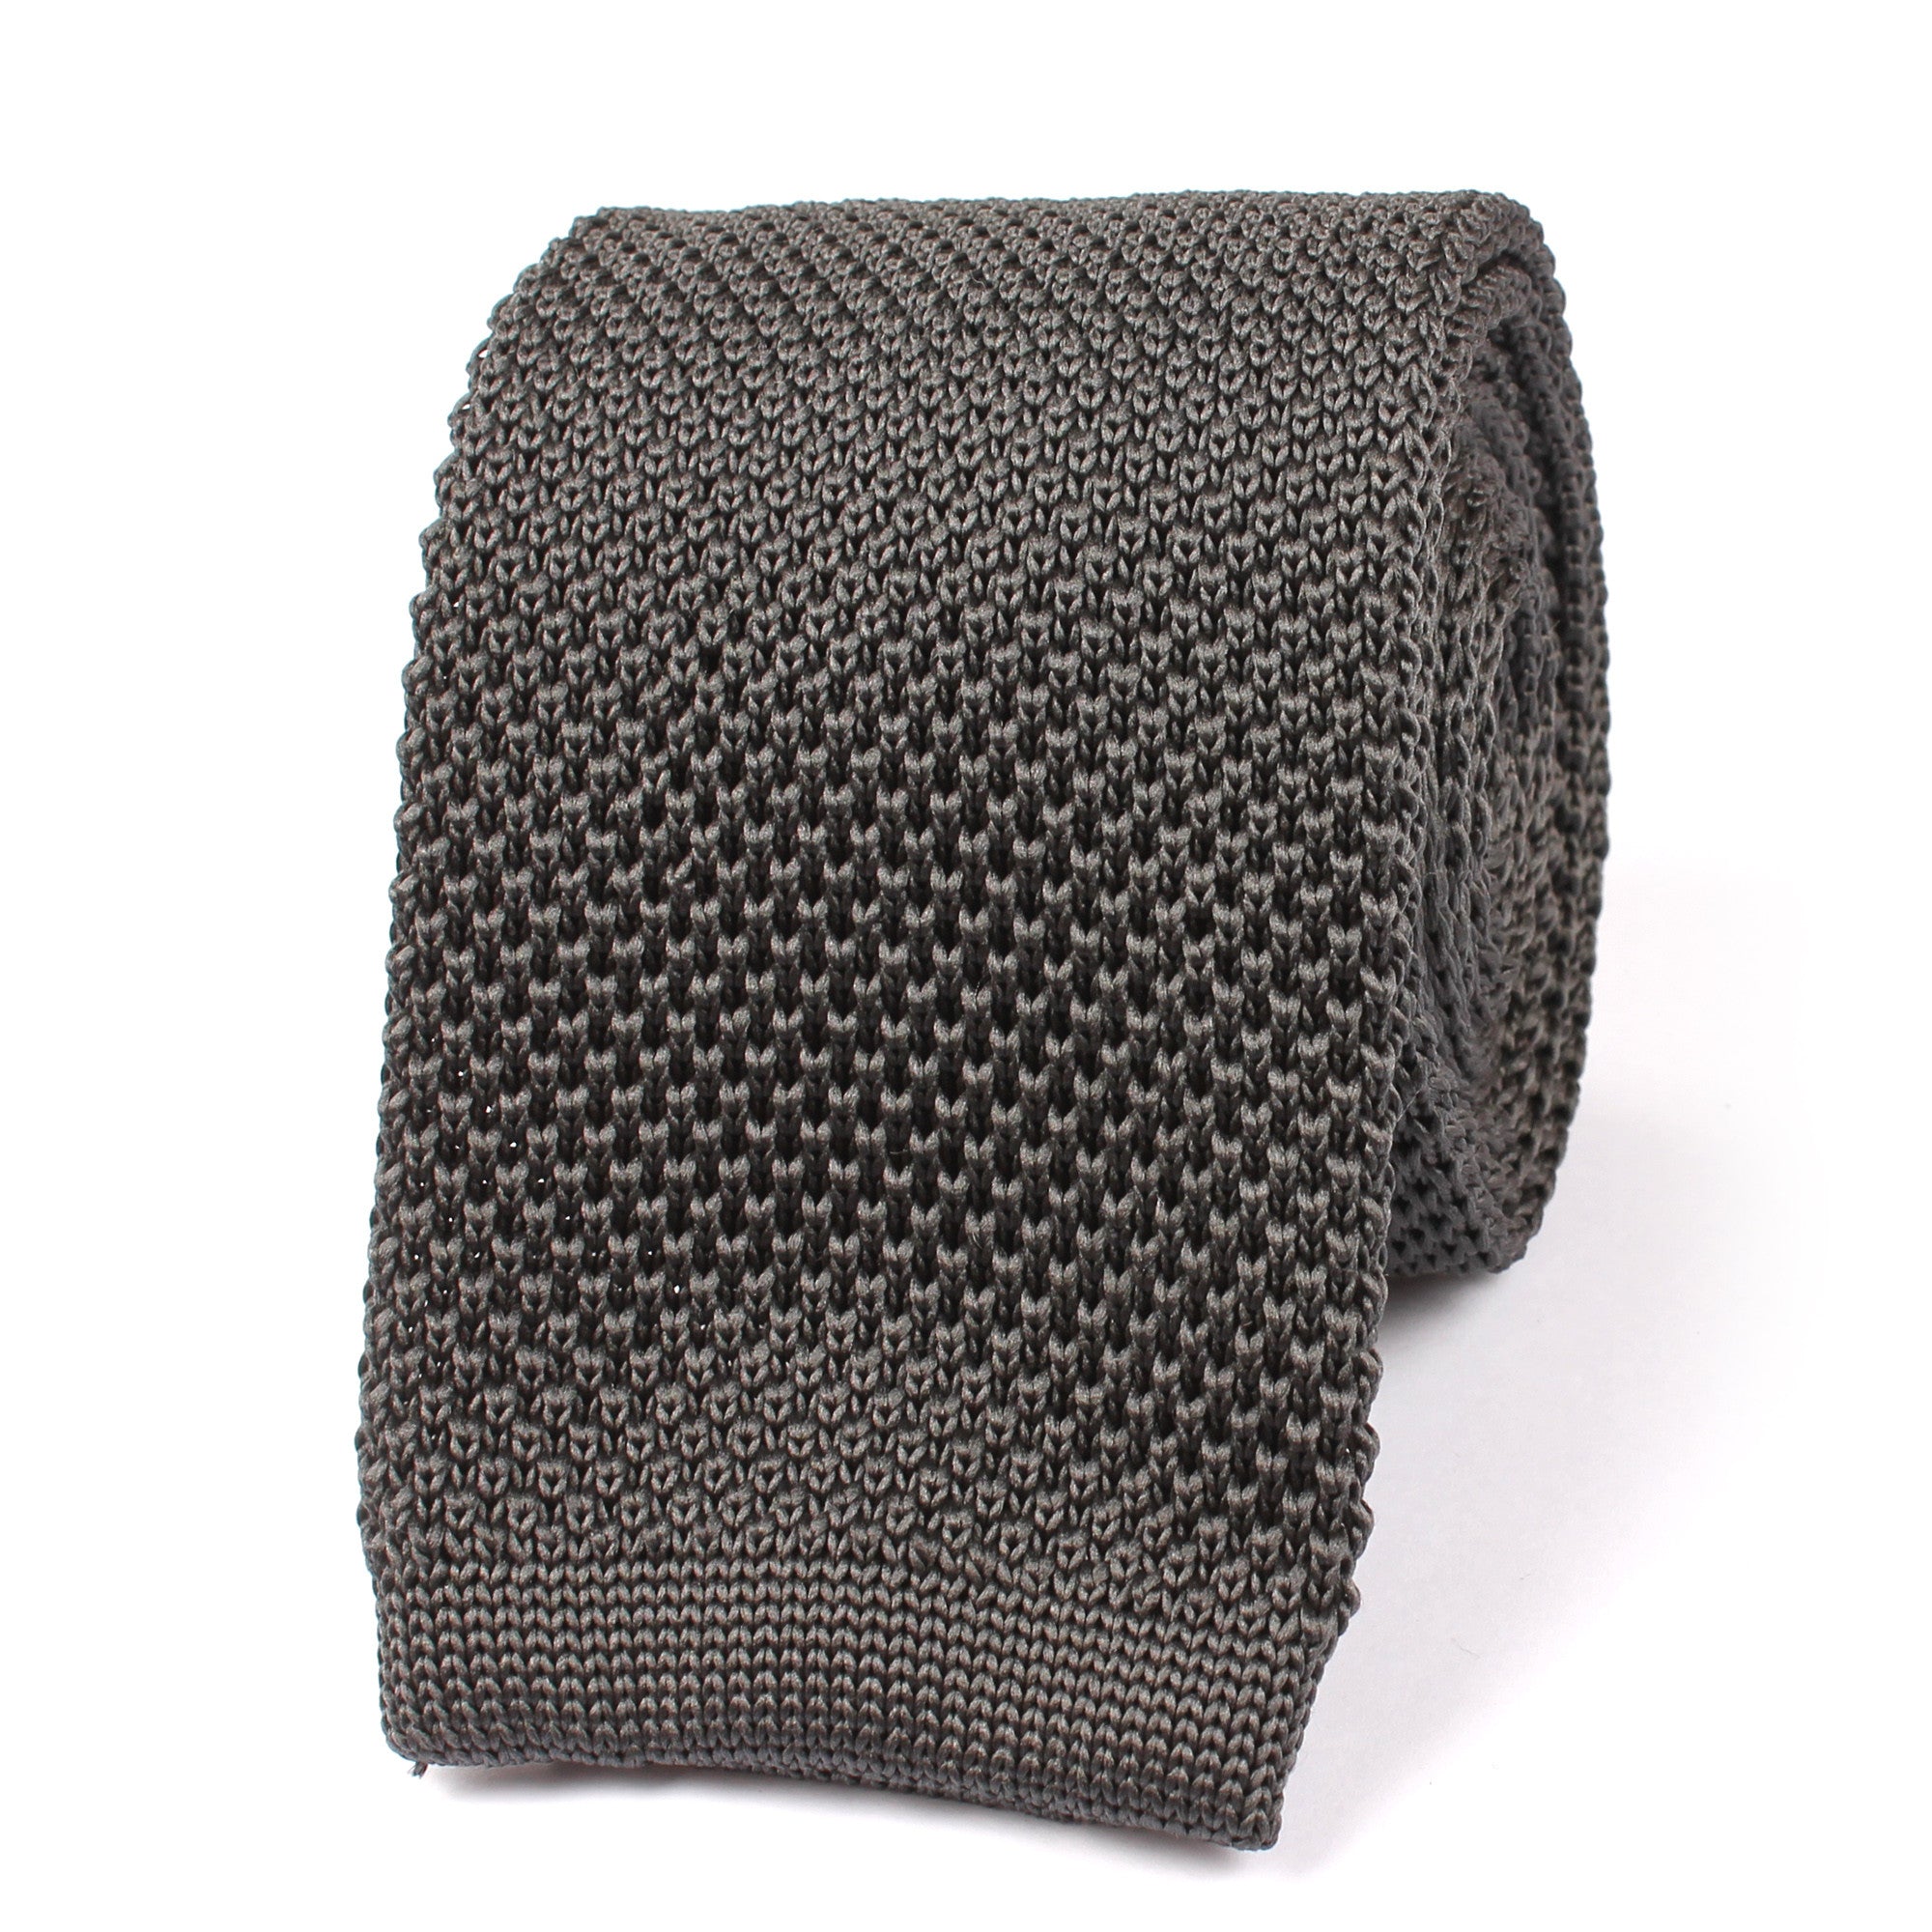 Charcoal Grey Knitted Tie